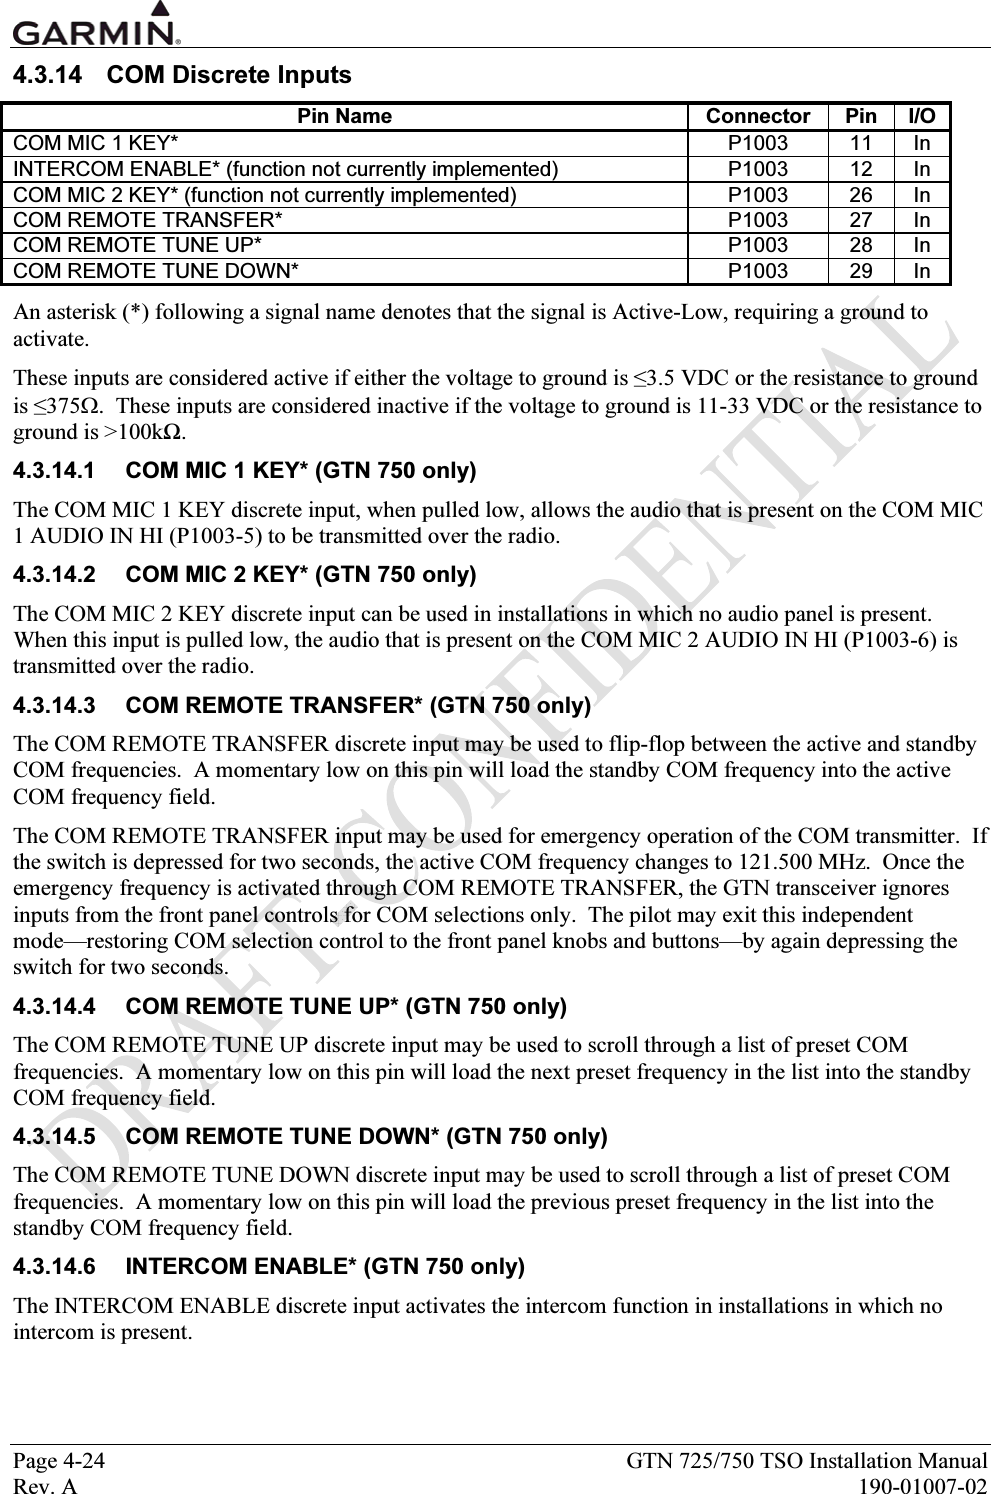  Page 4-24  GTN 725/750 TSO Installation Manual Rev. A  190-01007-02 4.3.14  COM Discrete Inputs Pin Name  Connector  Pin  I/O COM MIC 1 KEY*  P1003  11  In INTERCOM ENABLE* (function not currently implemented)  P1003  12  In COM MIC 2 KEY* (function not currently implemented)  P1003  26  In COM REMOTE TRANSFER*  P1003  27  In COM REMOTE TUNE UP*  P1003  28  In COM REMOTE TUNE DOWN*  P1003  29  In An asterisk (*) following a signal name denotes that the signal is Active-Low, requiring a ground to activate. These inputs are considered active if either the voltage to ground is ≤3.5 VDC or the resistance to ground is ≤375Ω.  These inputs are considered inactive if the voltage to ground is 11-33 VDC or the resistance to ground is &gt;100kΩ. 4.3.14.1  COM MIC 1 KEY* (GTN 750 only) The COM MIC 1 KEY discrete input, when pulled low, allows the audio that is present on the COM MIC 1 AUDIO IN HI (P1003-5) to be transmitted over the radio. 4.3.14.2  COM MIC 2 KEY* (GTN 750 only) The COM MIC 2 KEY discrete input can be used in installations in which no audio panel is present.  When this input is pulled low, the audio that is present on the COM MIC 2 AUDIO IN HI (P1003-6) is transmitted over the radio. 4.3.14.3  COM REMOTE TRANSFER* (GTN 750 only) The COM REMOTE TRANSFER discrete input may be used to flip-flop between the active and standby COM frequencies.  A momentary low on this pin will load the standby COM frequency into the active COM frequency field. The COM REMOTE TRANSFER input may be used for emergency operation of the COM transmitter.  If the switch is depressed for two seconds, the active COM frequency changes to 121.500 MHz.  Once the emergency frequency is activated through COM REMOTE TRANSFER, the GTN transceiver ignores inputs from the front panel controls for COM selections only.  The pilot may exit this independent mode—restoring COM selection control to the front panel knobs and buttons—by again depressing the switch for two seconds. 4.3.14.4  COM REMOTE TUNE UP* (GTN 750 only) The COM REMOTE TUNE UP discrete input may be used to scroll through a list of preset COM frequencies.  A momentary low on this pin will load the next preset frequency in the list into the standby COM frequency field. 4.3.14.5  COM REMOTE TUNE DOWN* (GTN 750 only) The COM REMOTE TUNE DOWN discrete input may be used to scroll through a list of preset COM frequencies.  A momentary low on this pin will load the previous preset frequency in the list into the standby COM frequency field. 4.3.14.6  INTERCOM ENABLE* (GTN 750 only) The INTERCOM ENABLE discrete input activates the intercom function in installations in which no intercom is present. 